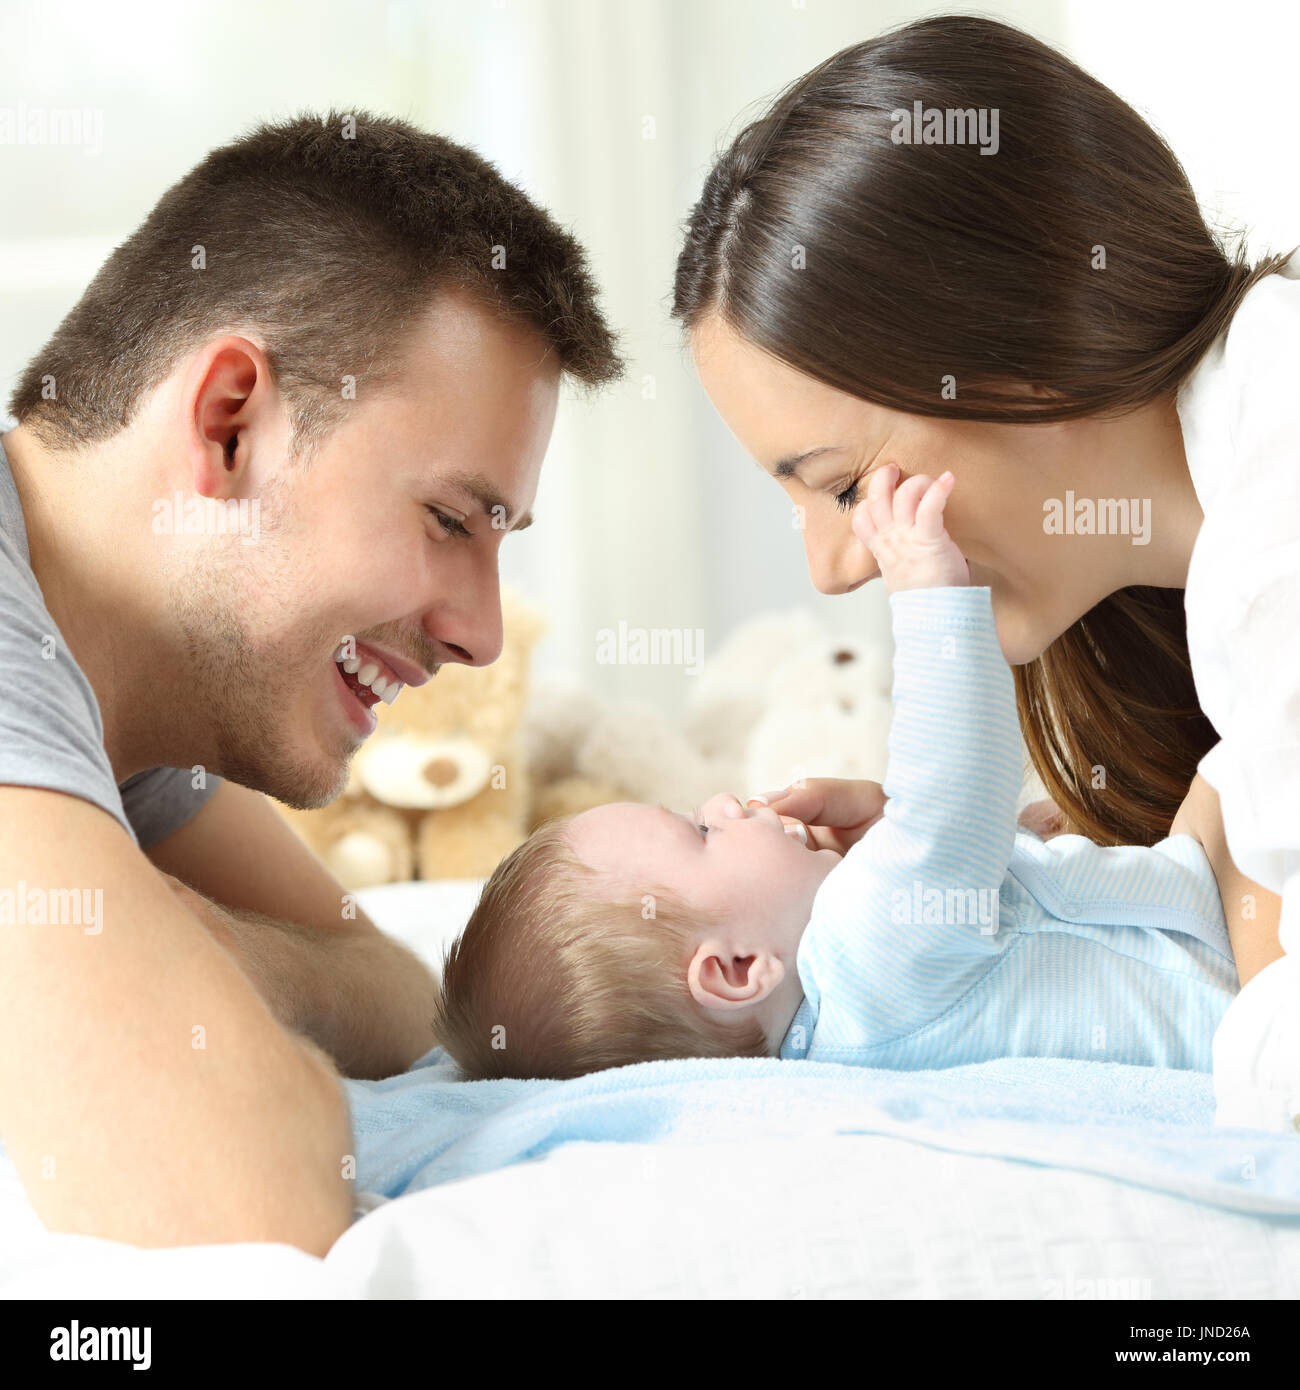 Side view close up of a baby playing with his parents on a bed Stock Photo